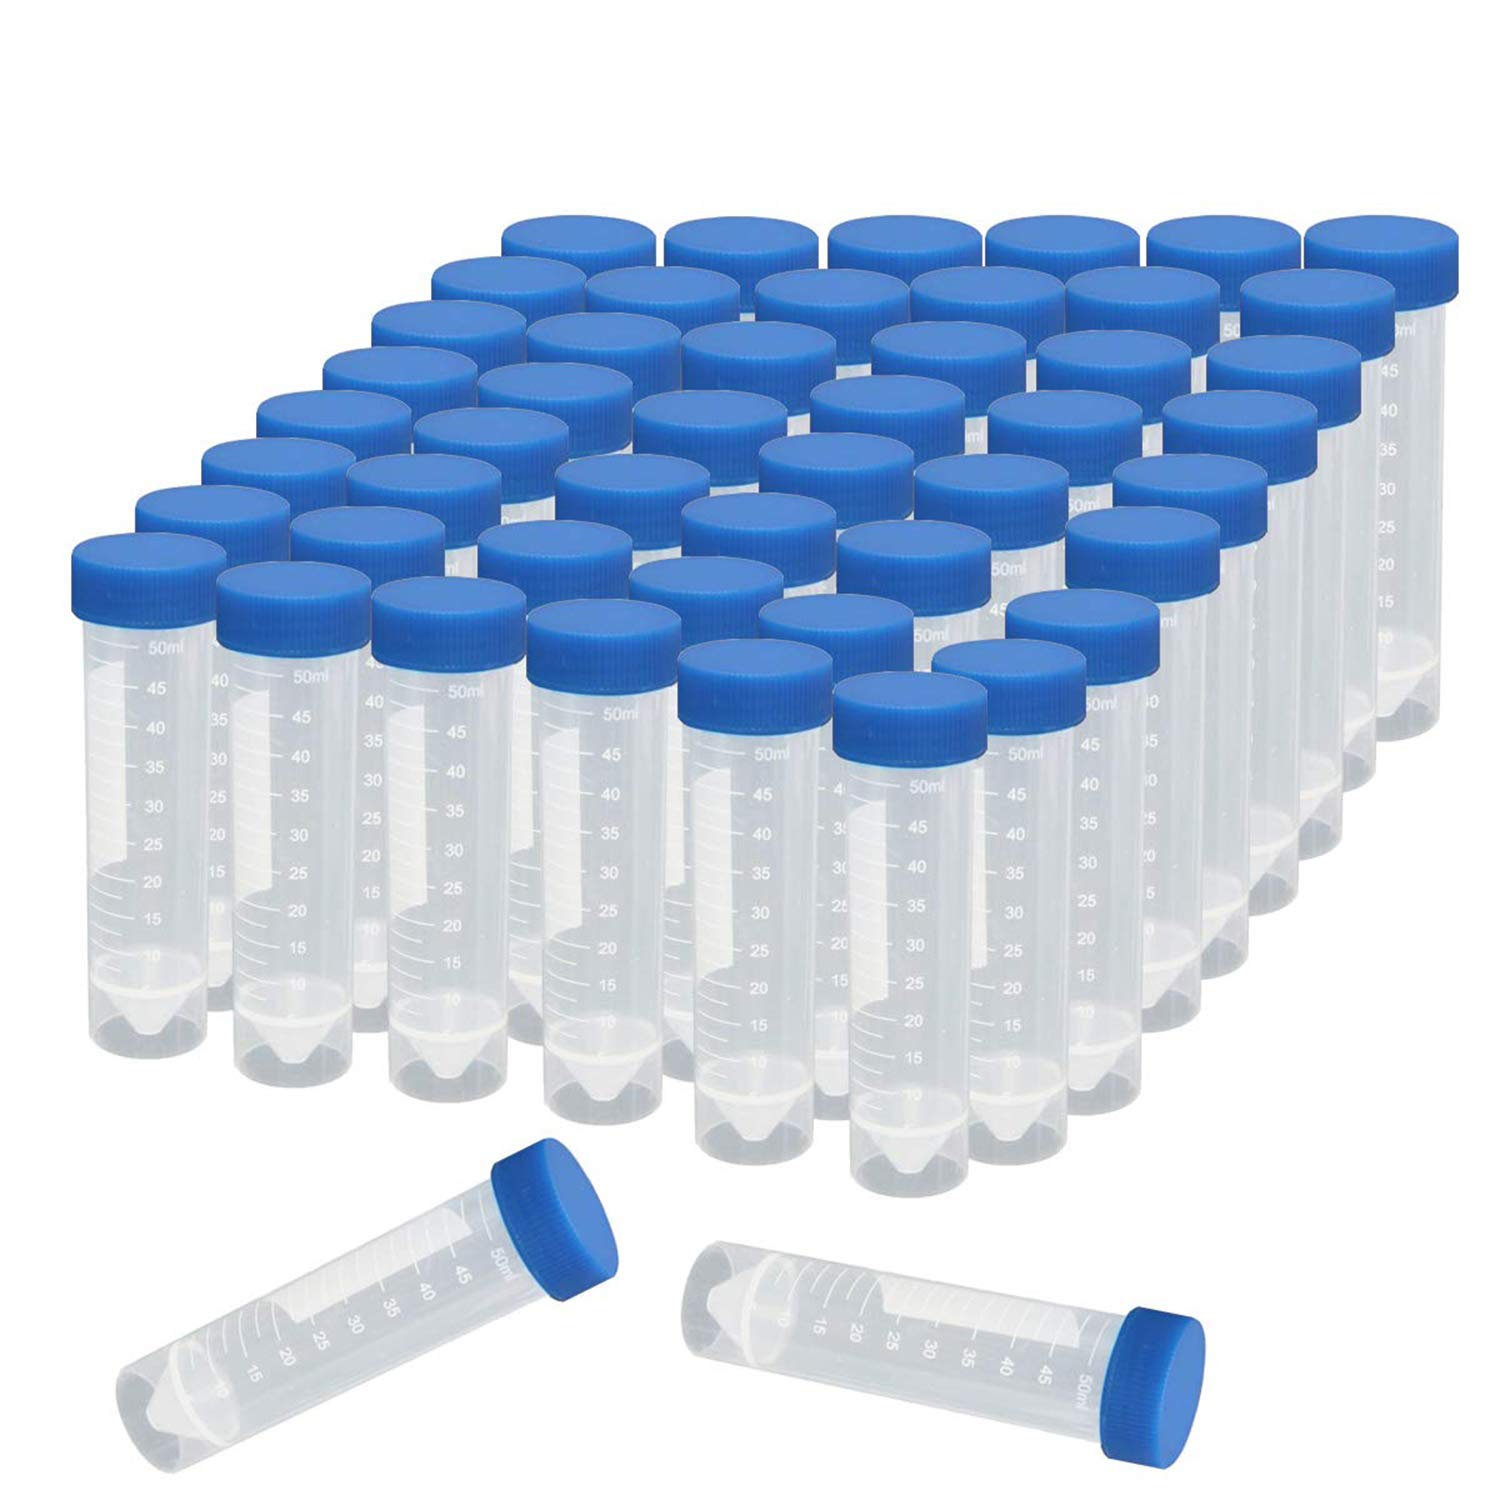 An image showing centrifuge tubes, which are commonly used in laboratories for separating liquids based on density. Learn more about what are centrifuge tubes used for in our guide to understanding centrifuge tubes.